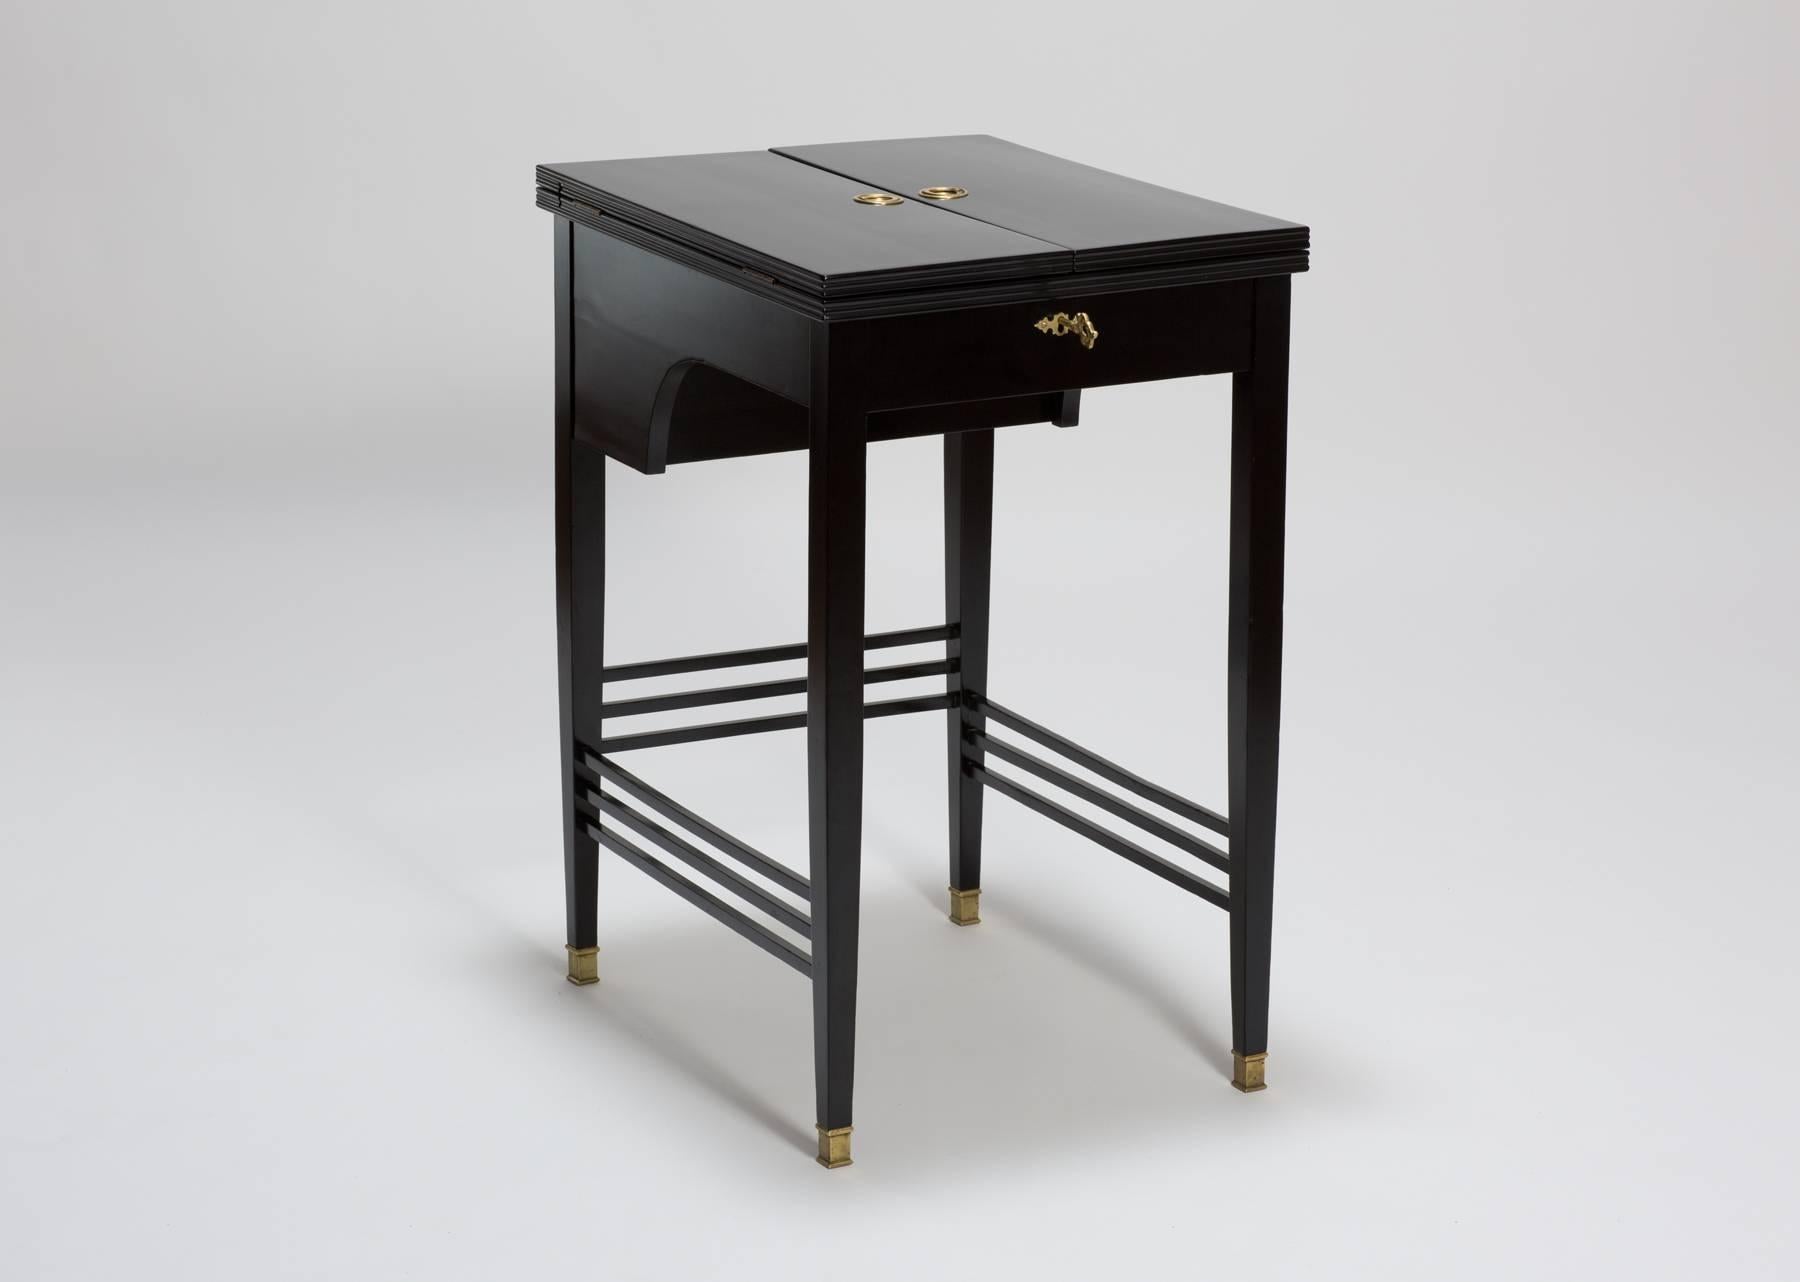 A very elegant antique Art Nouveau writing desk From Vienna. The table is black lacquered with brass mountains.
The writing table has a foldable mechanism. If the desk is closed, it looks like a nice side table. If you pull the two brass rings on